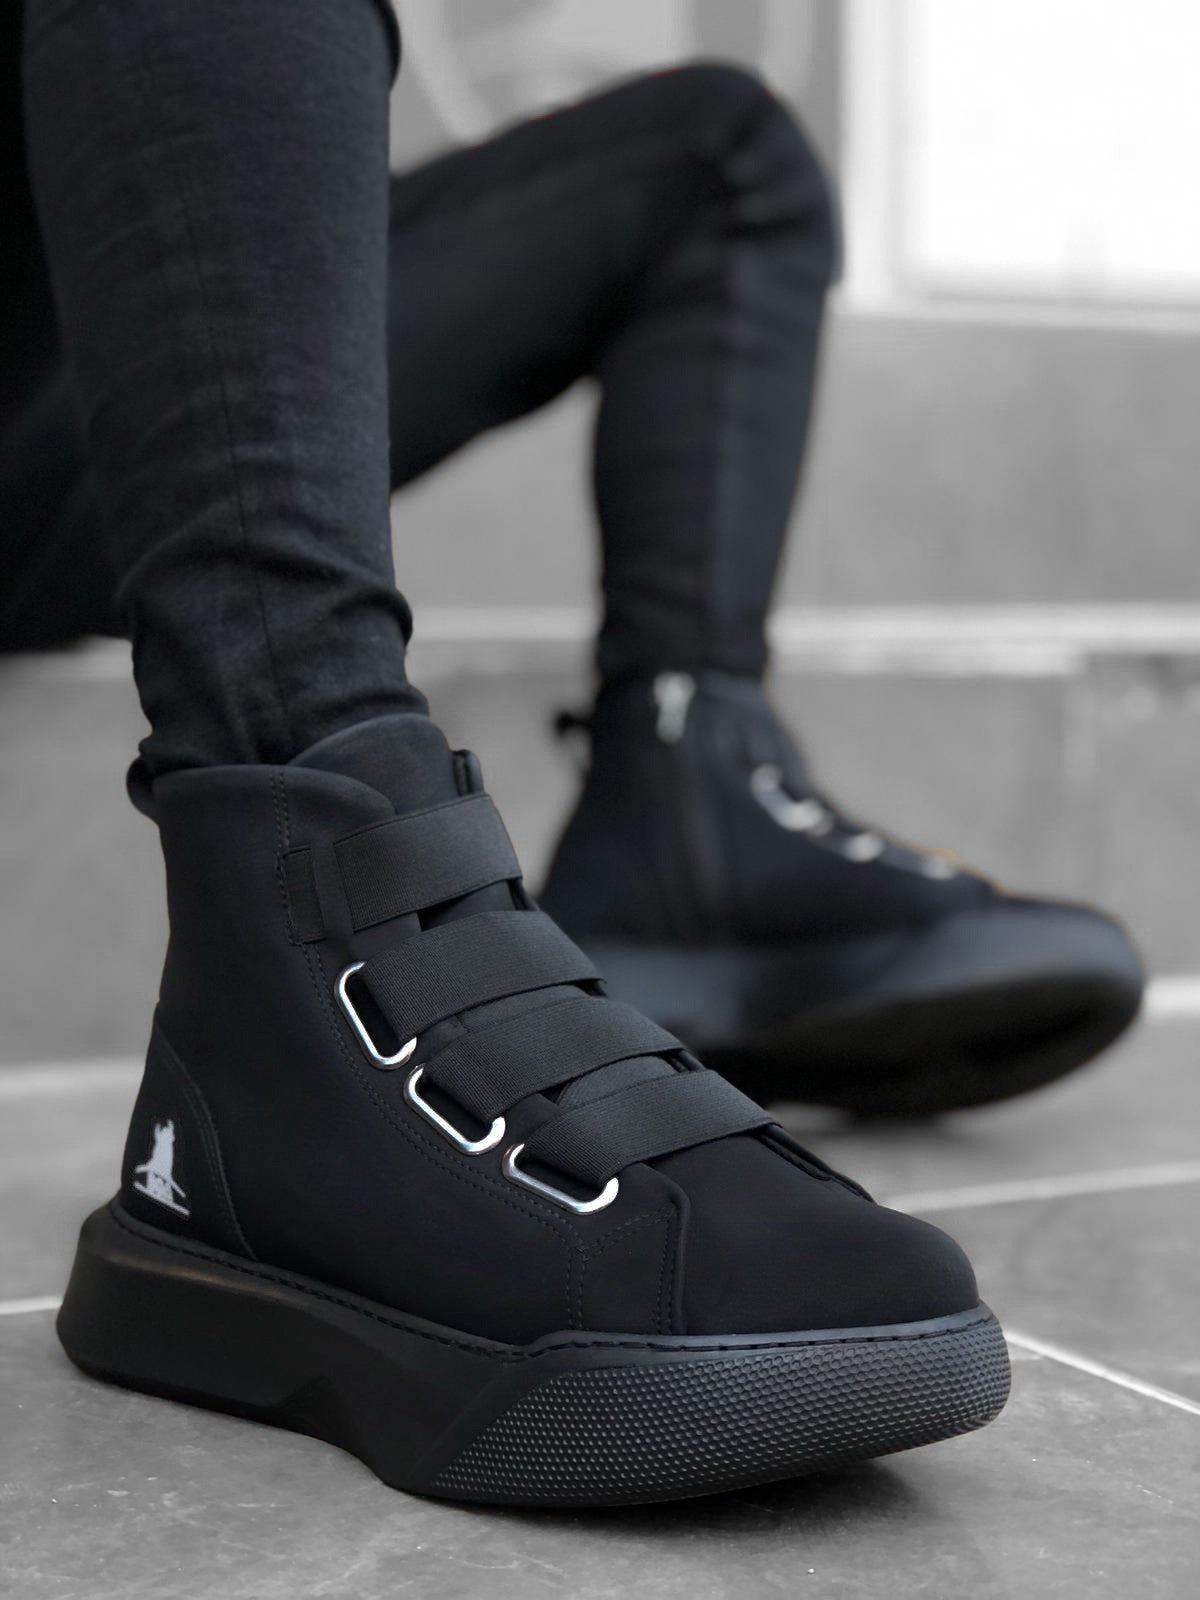 high quality black sneakers online market| Alibaba.com